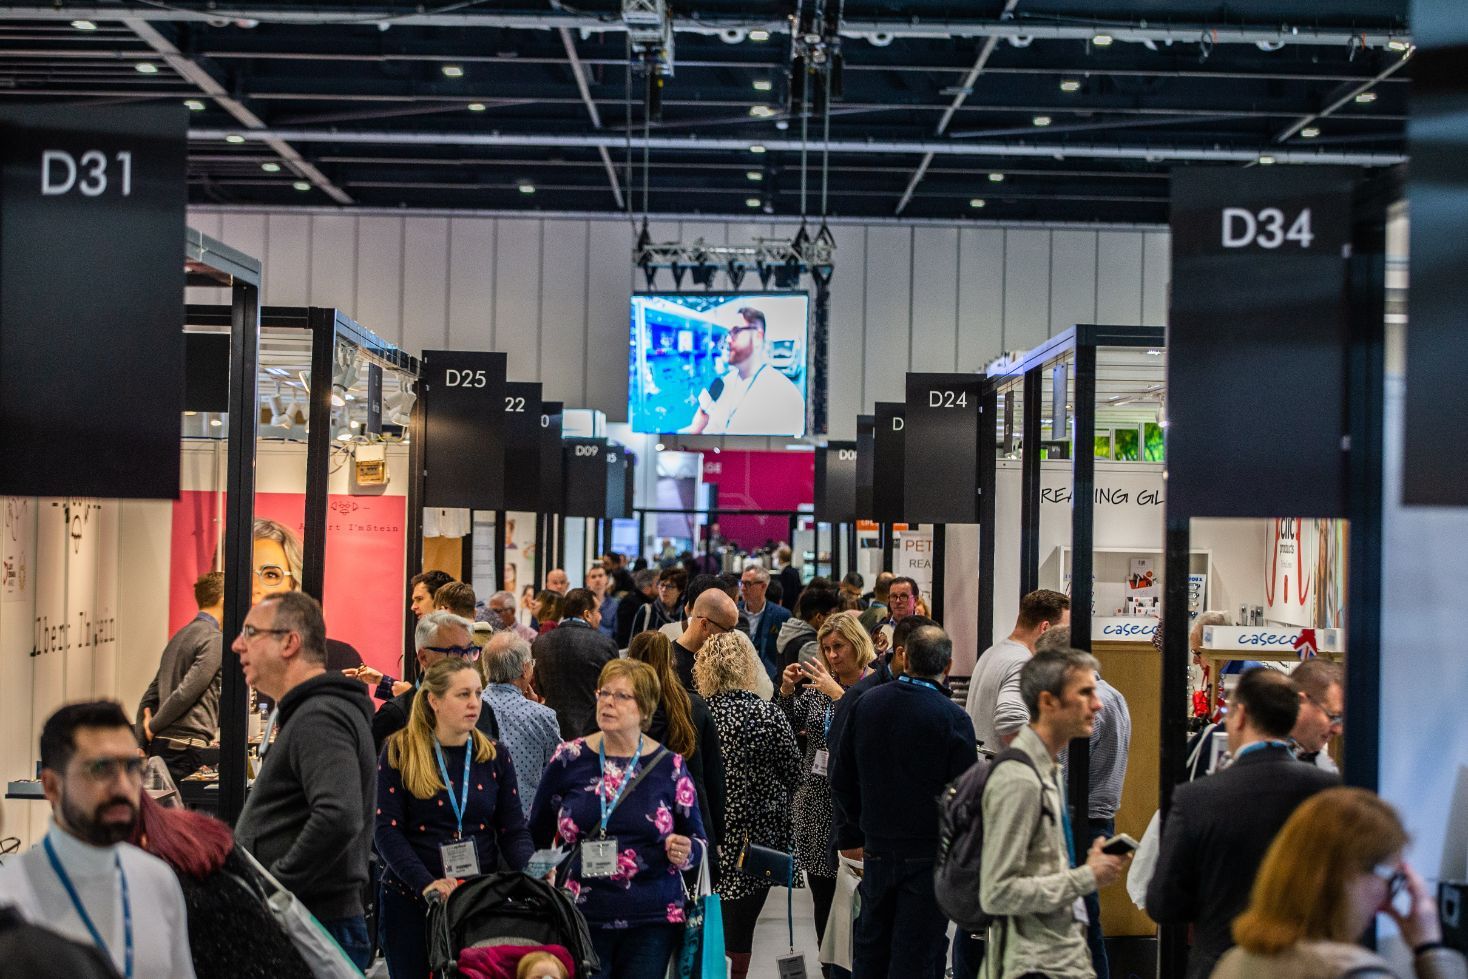 THE UK’S ONLY OPTICAL EXHIBITION